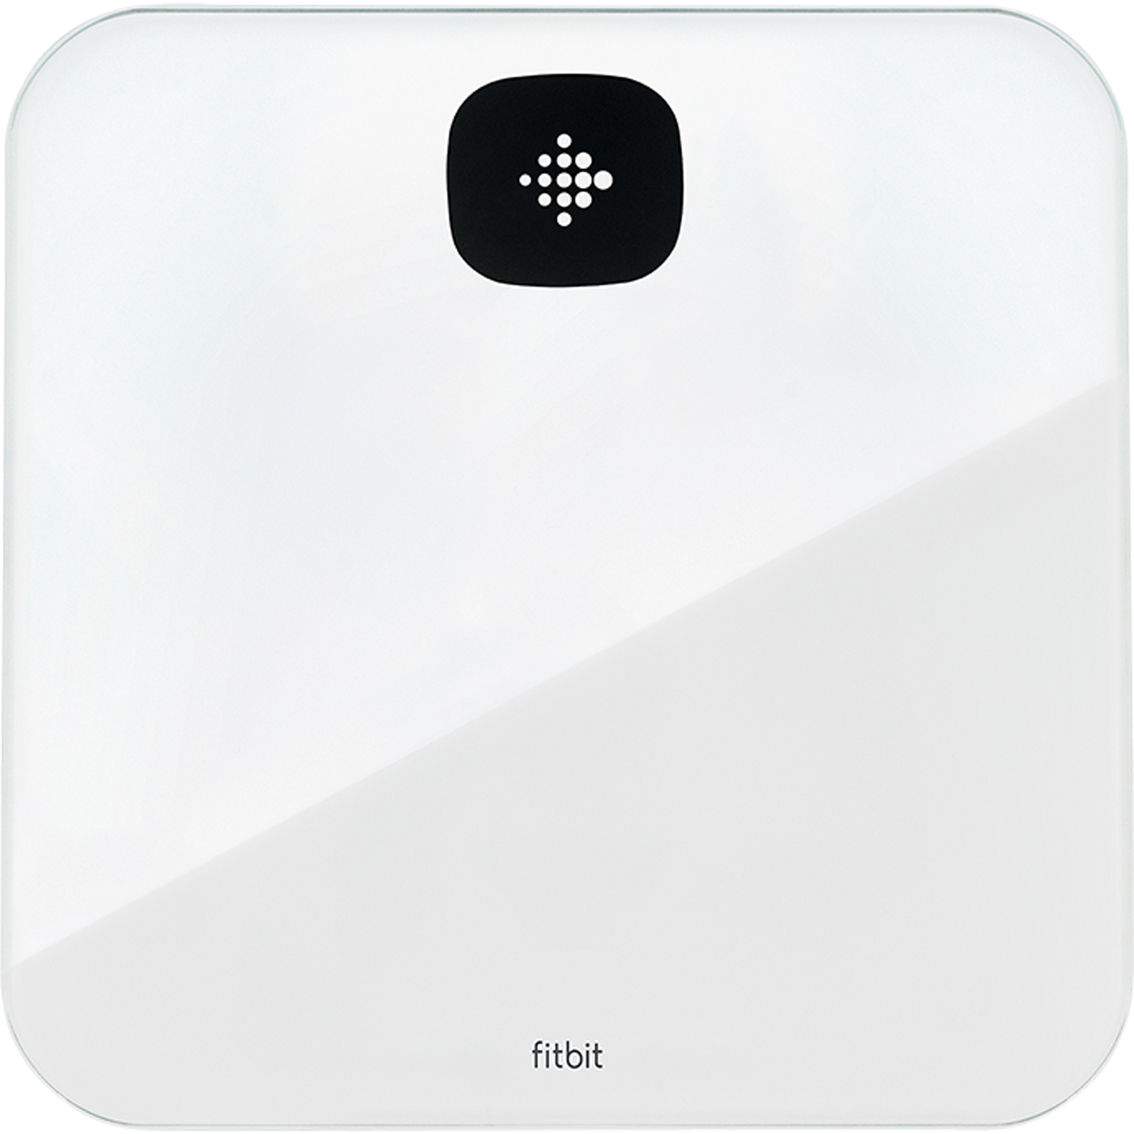 Fitbit Aria Air Smart Scale - Image 1 of 3